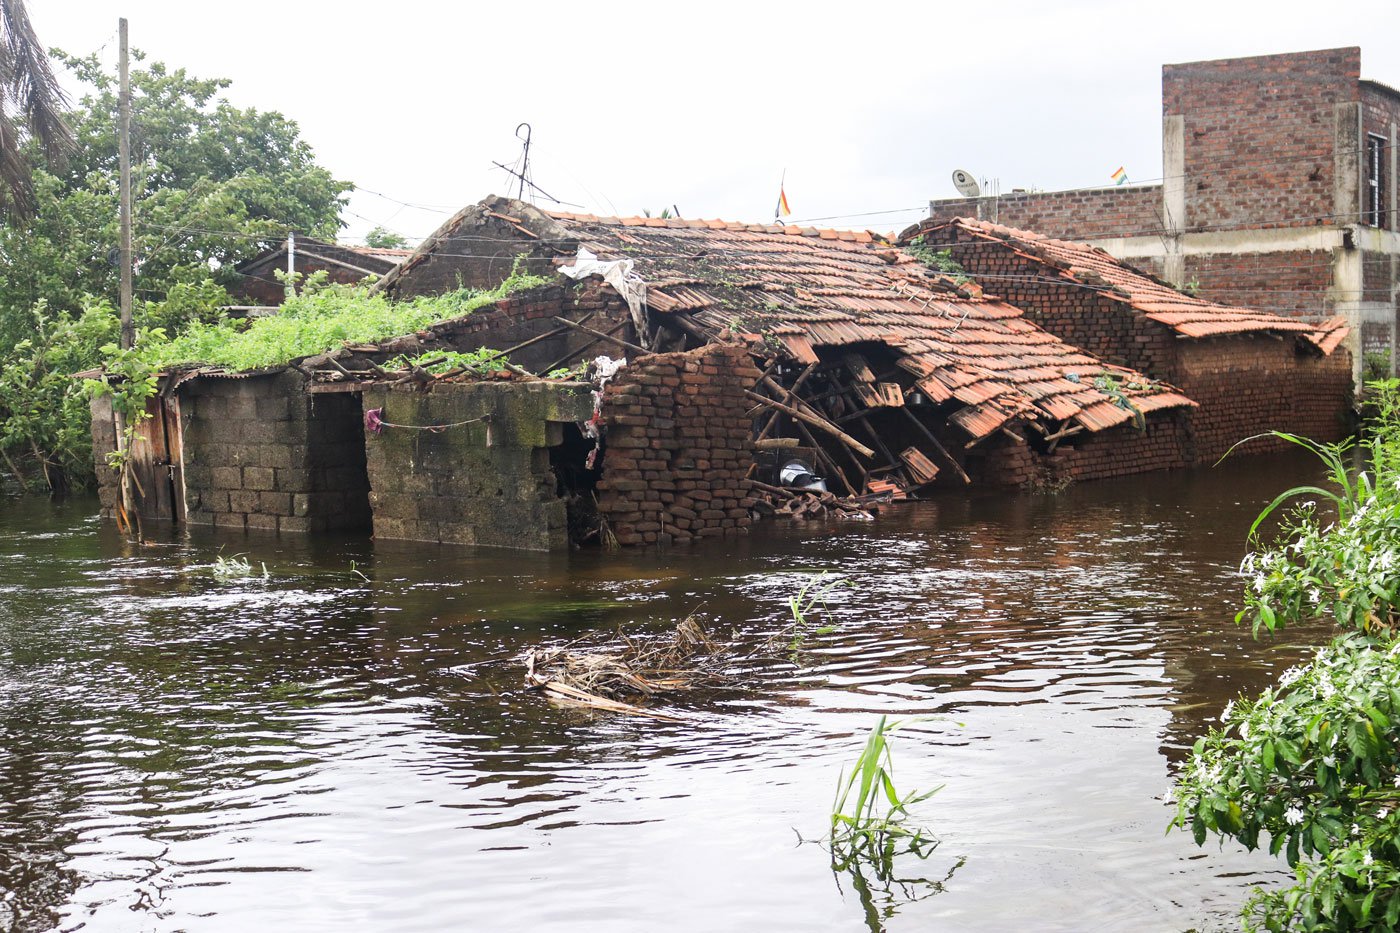 A house in Arjunwad village that was destroyed by the floods in 2019